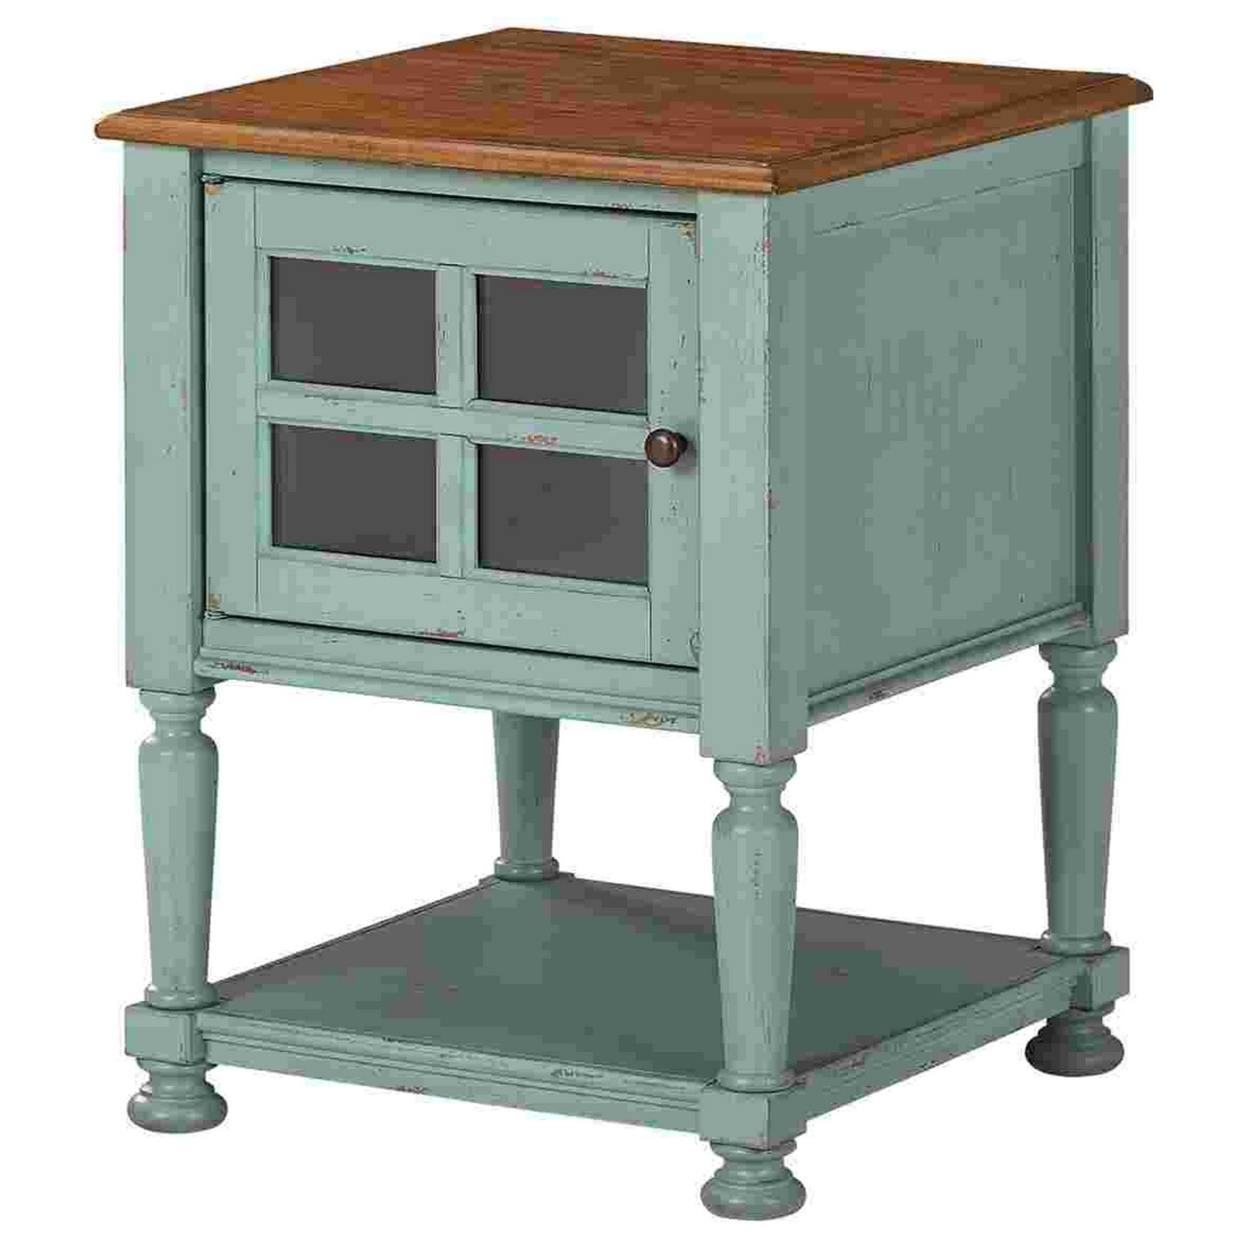 Wooden Accent Cabinet With Lattice Door Front, Teal Blue And Brown- Saltoro Sherpi